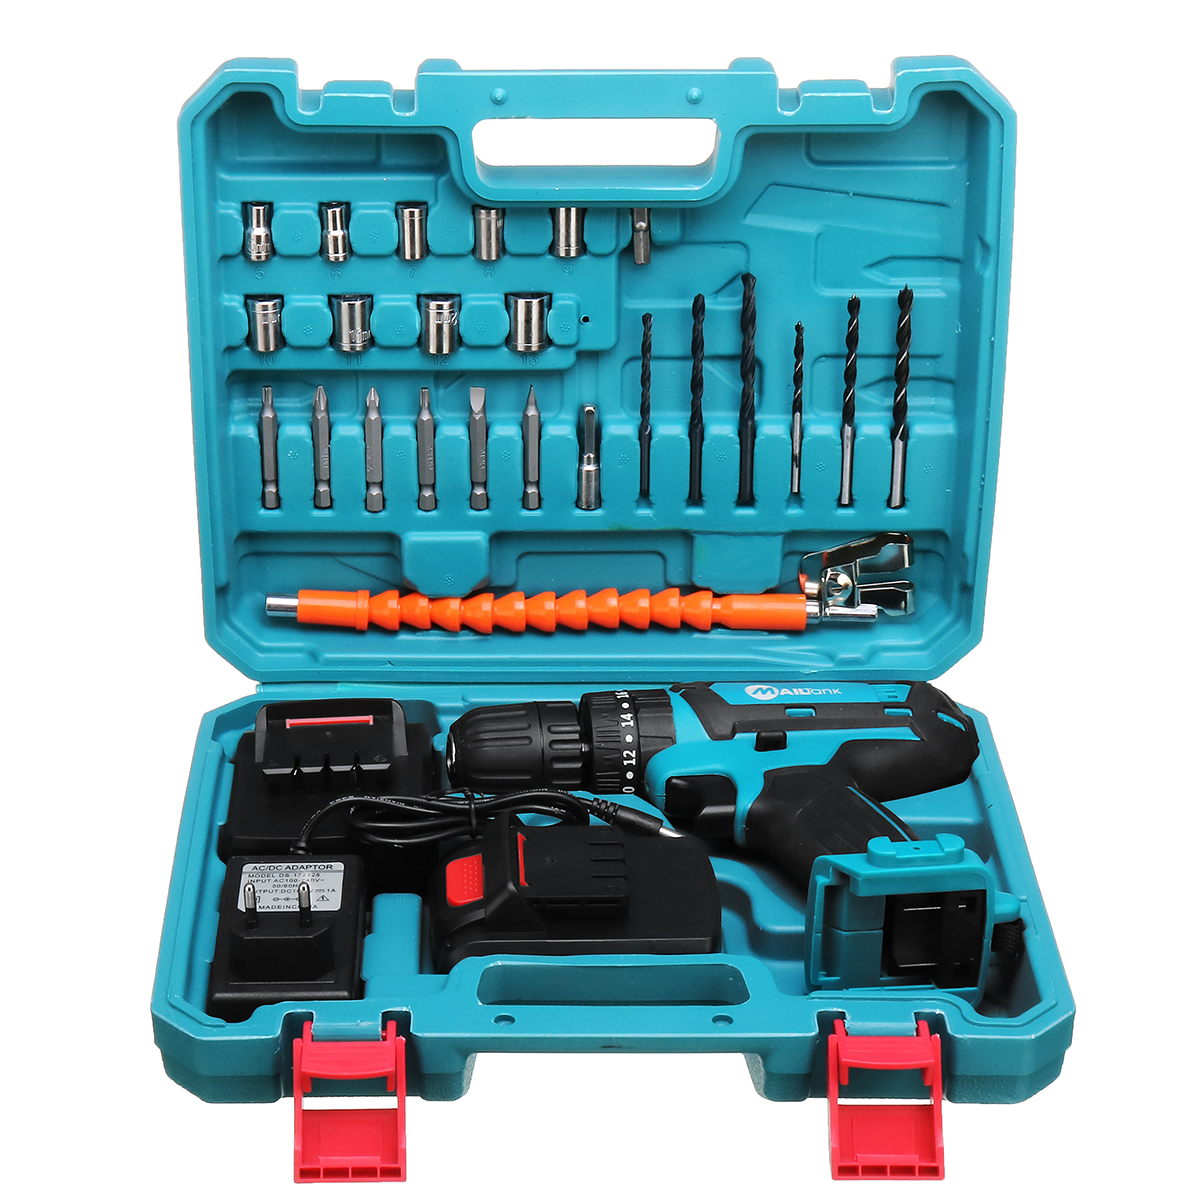 32V 2 Speed Power Drills 6000mah Cordless Drill 3 IN1 Electric Screwdriver Hammer Hand Drill 2 Batteries 22